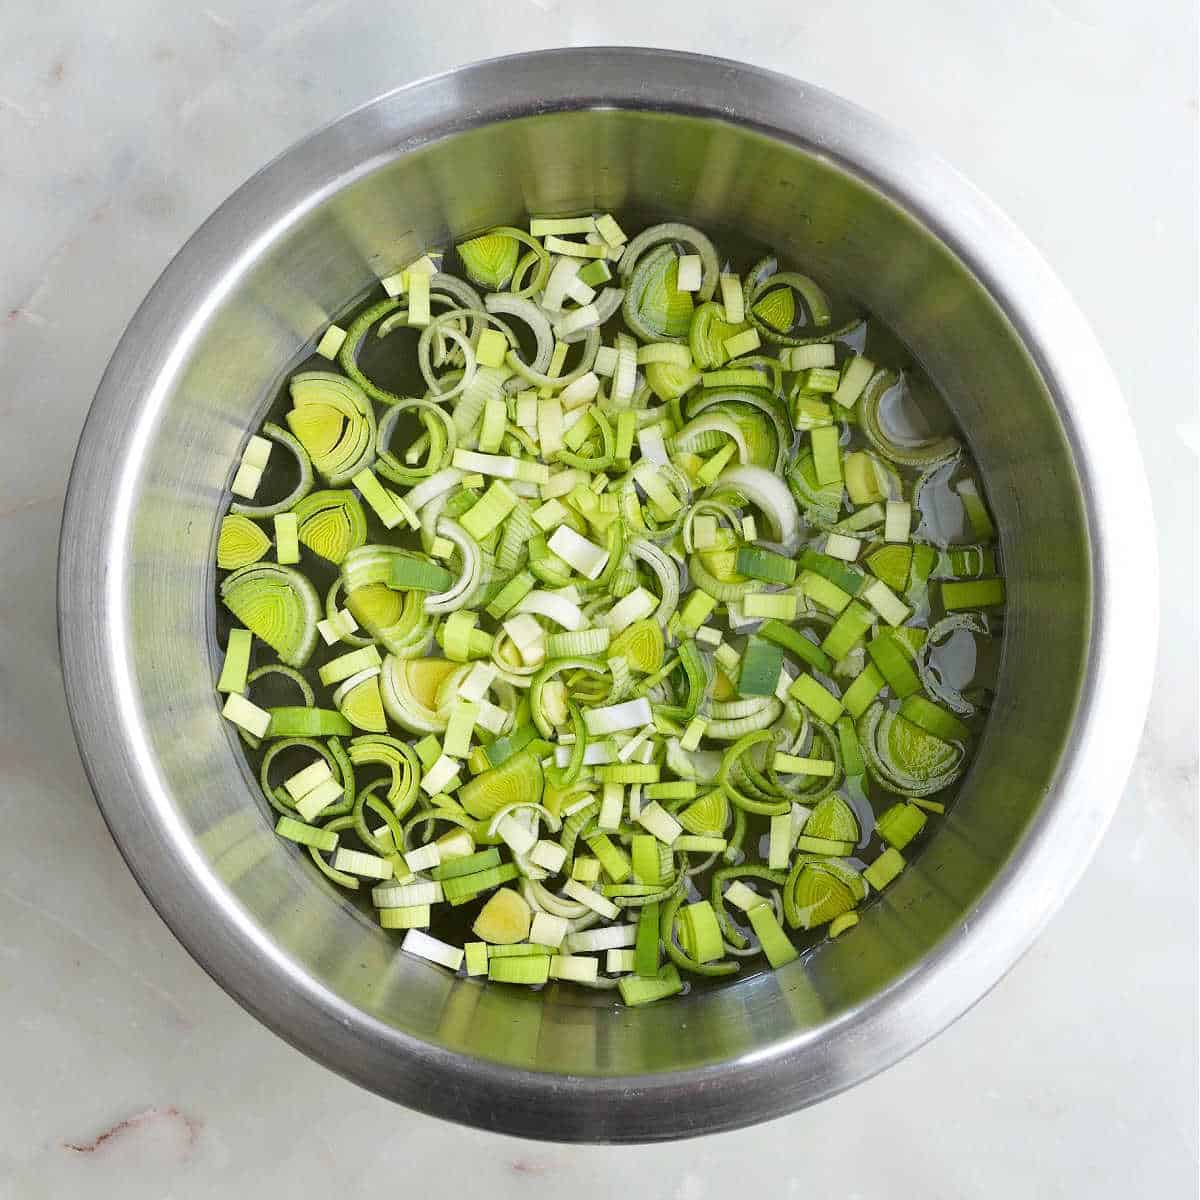 cut leeks being washed in a bowl of water on a counter